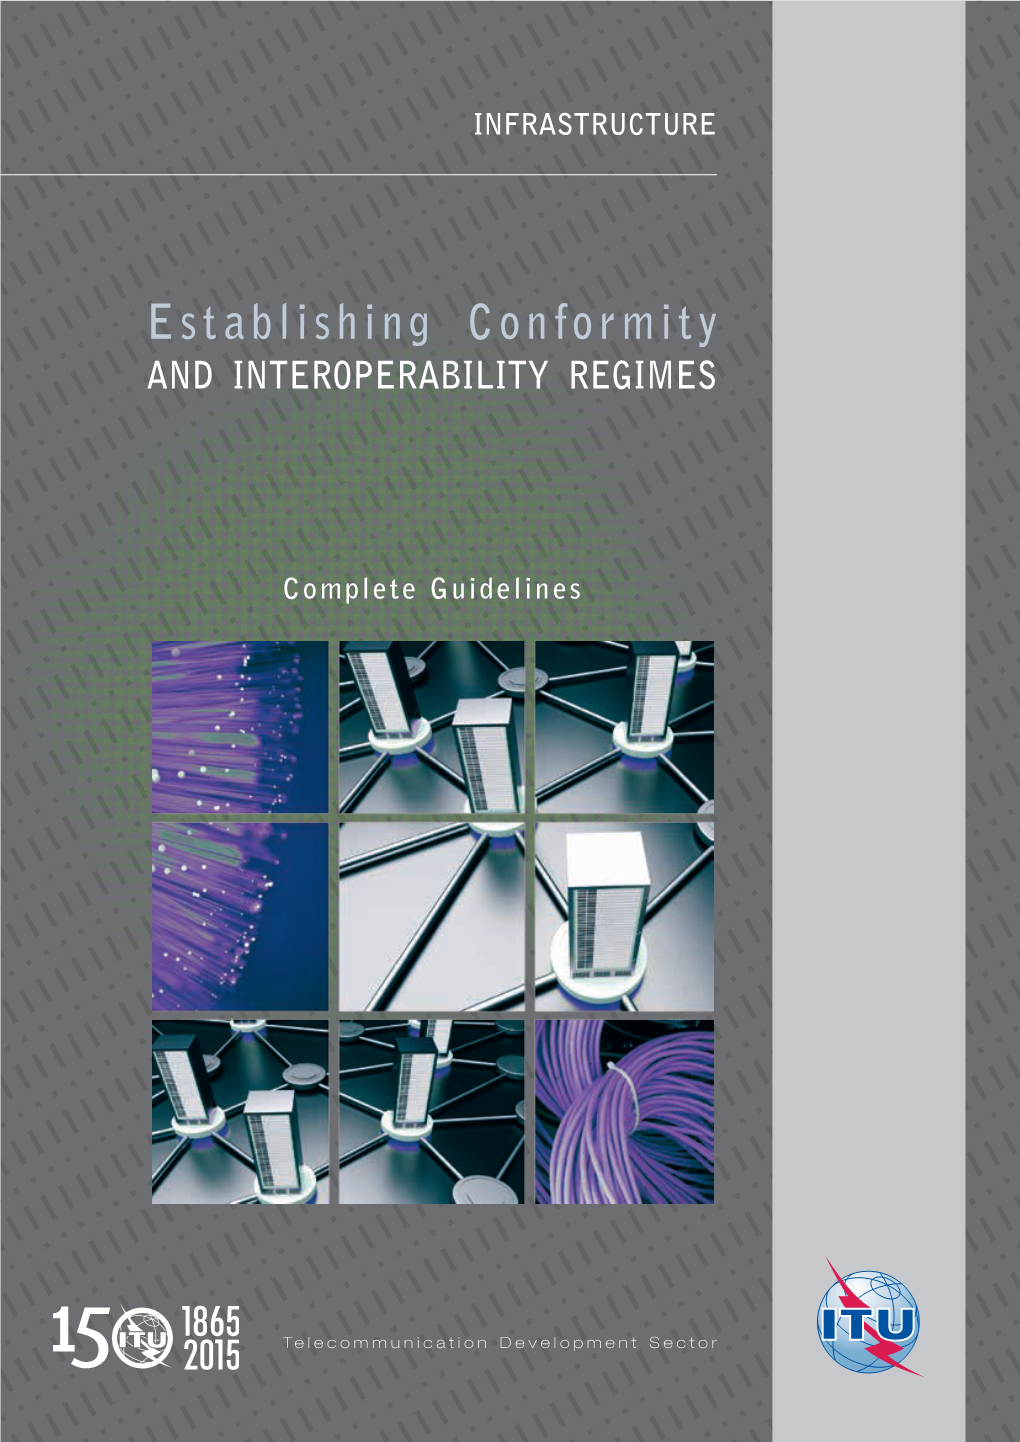 Establishing Conformity and Interoperability Regimes: Complete Guidelines February 2015